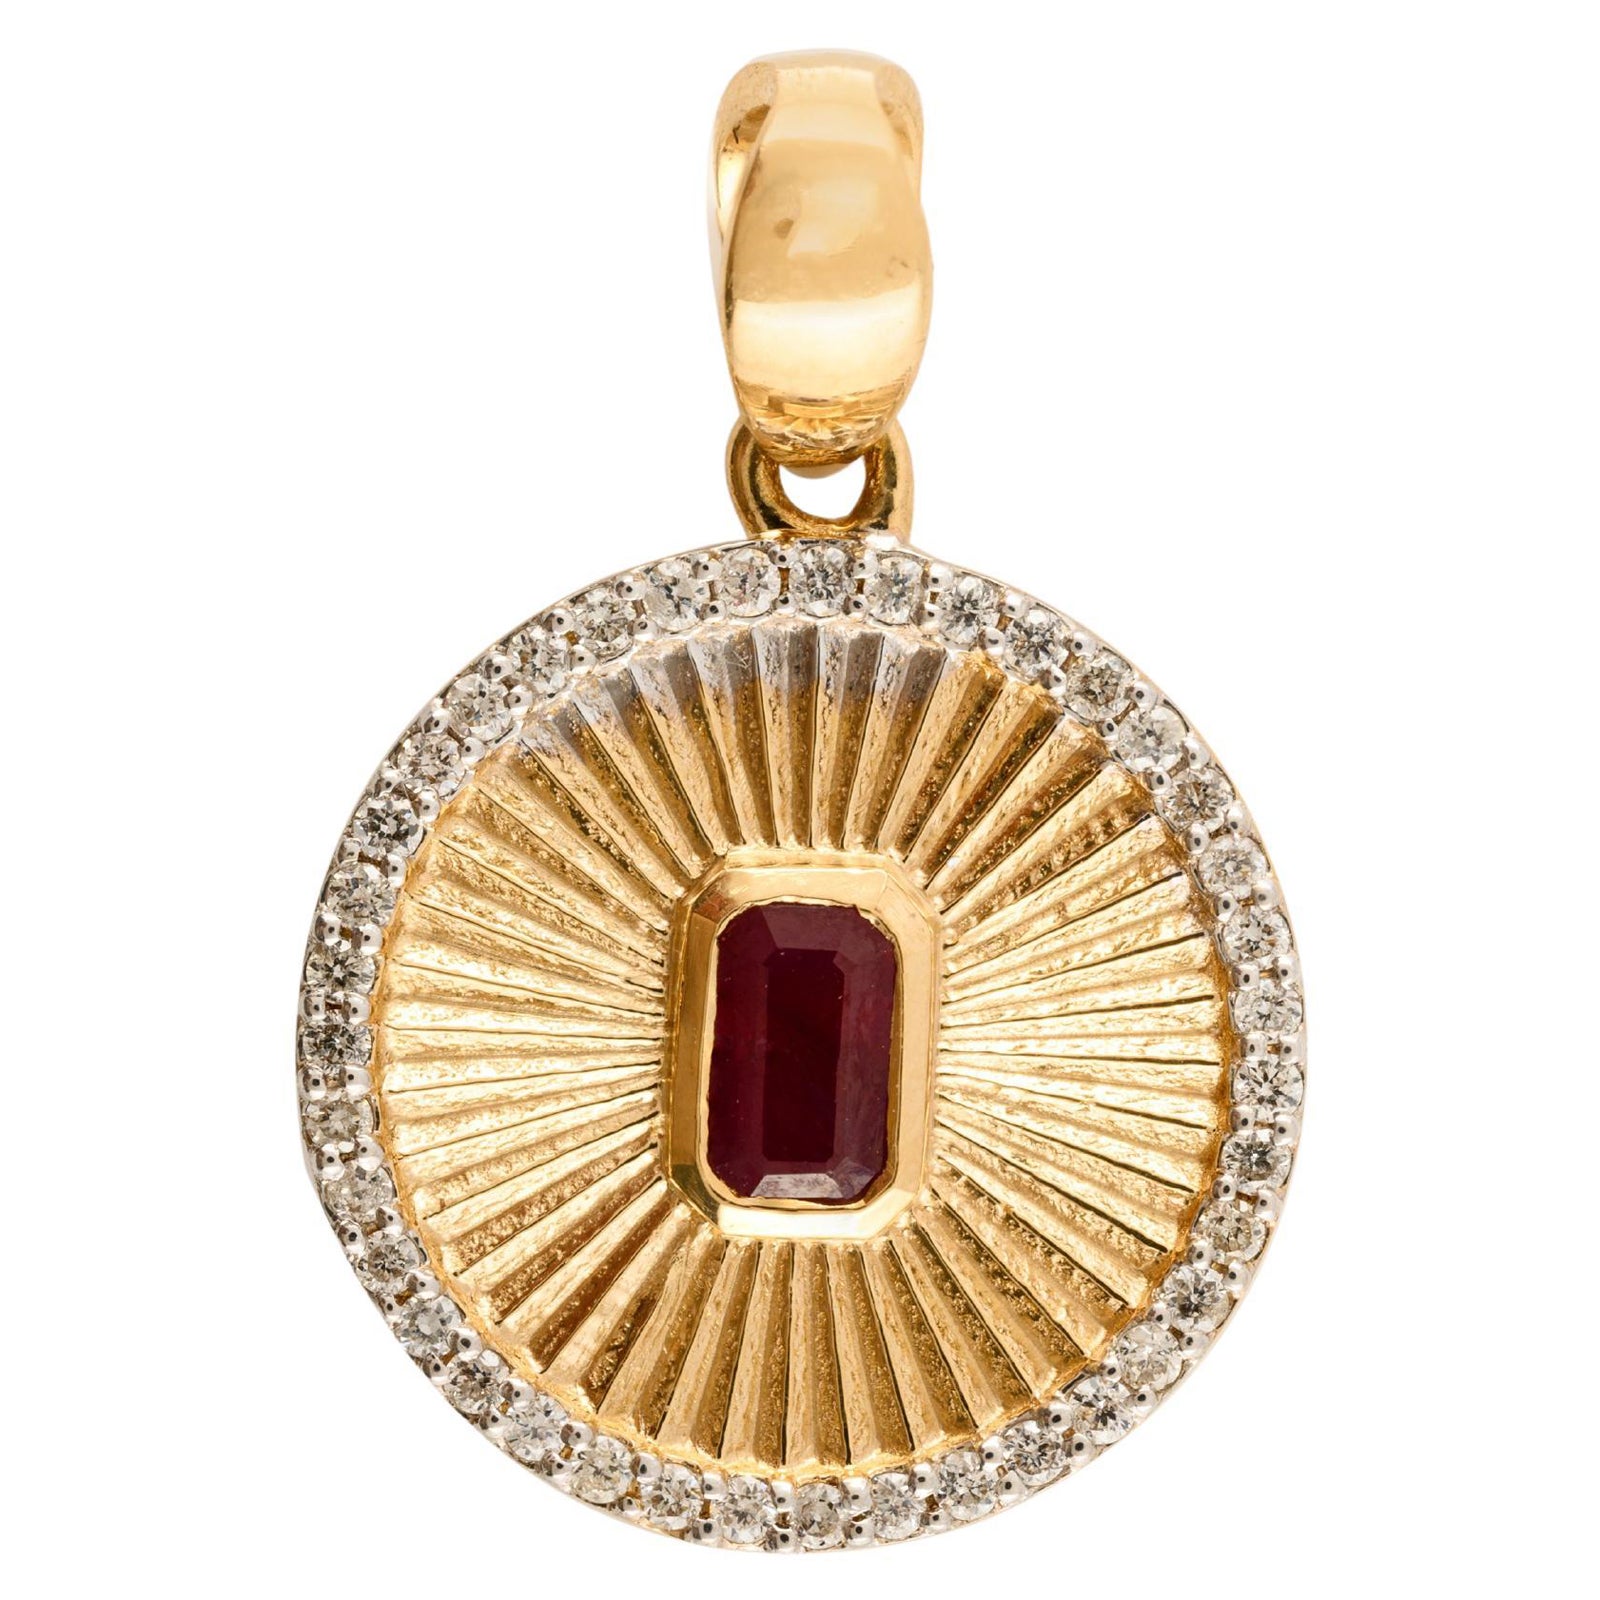 Ruby Medallion Charm Pendant 18k Solid Yellow Gold, Gift For Her Christmas For Sale